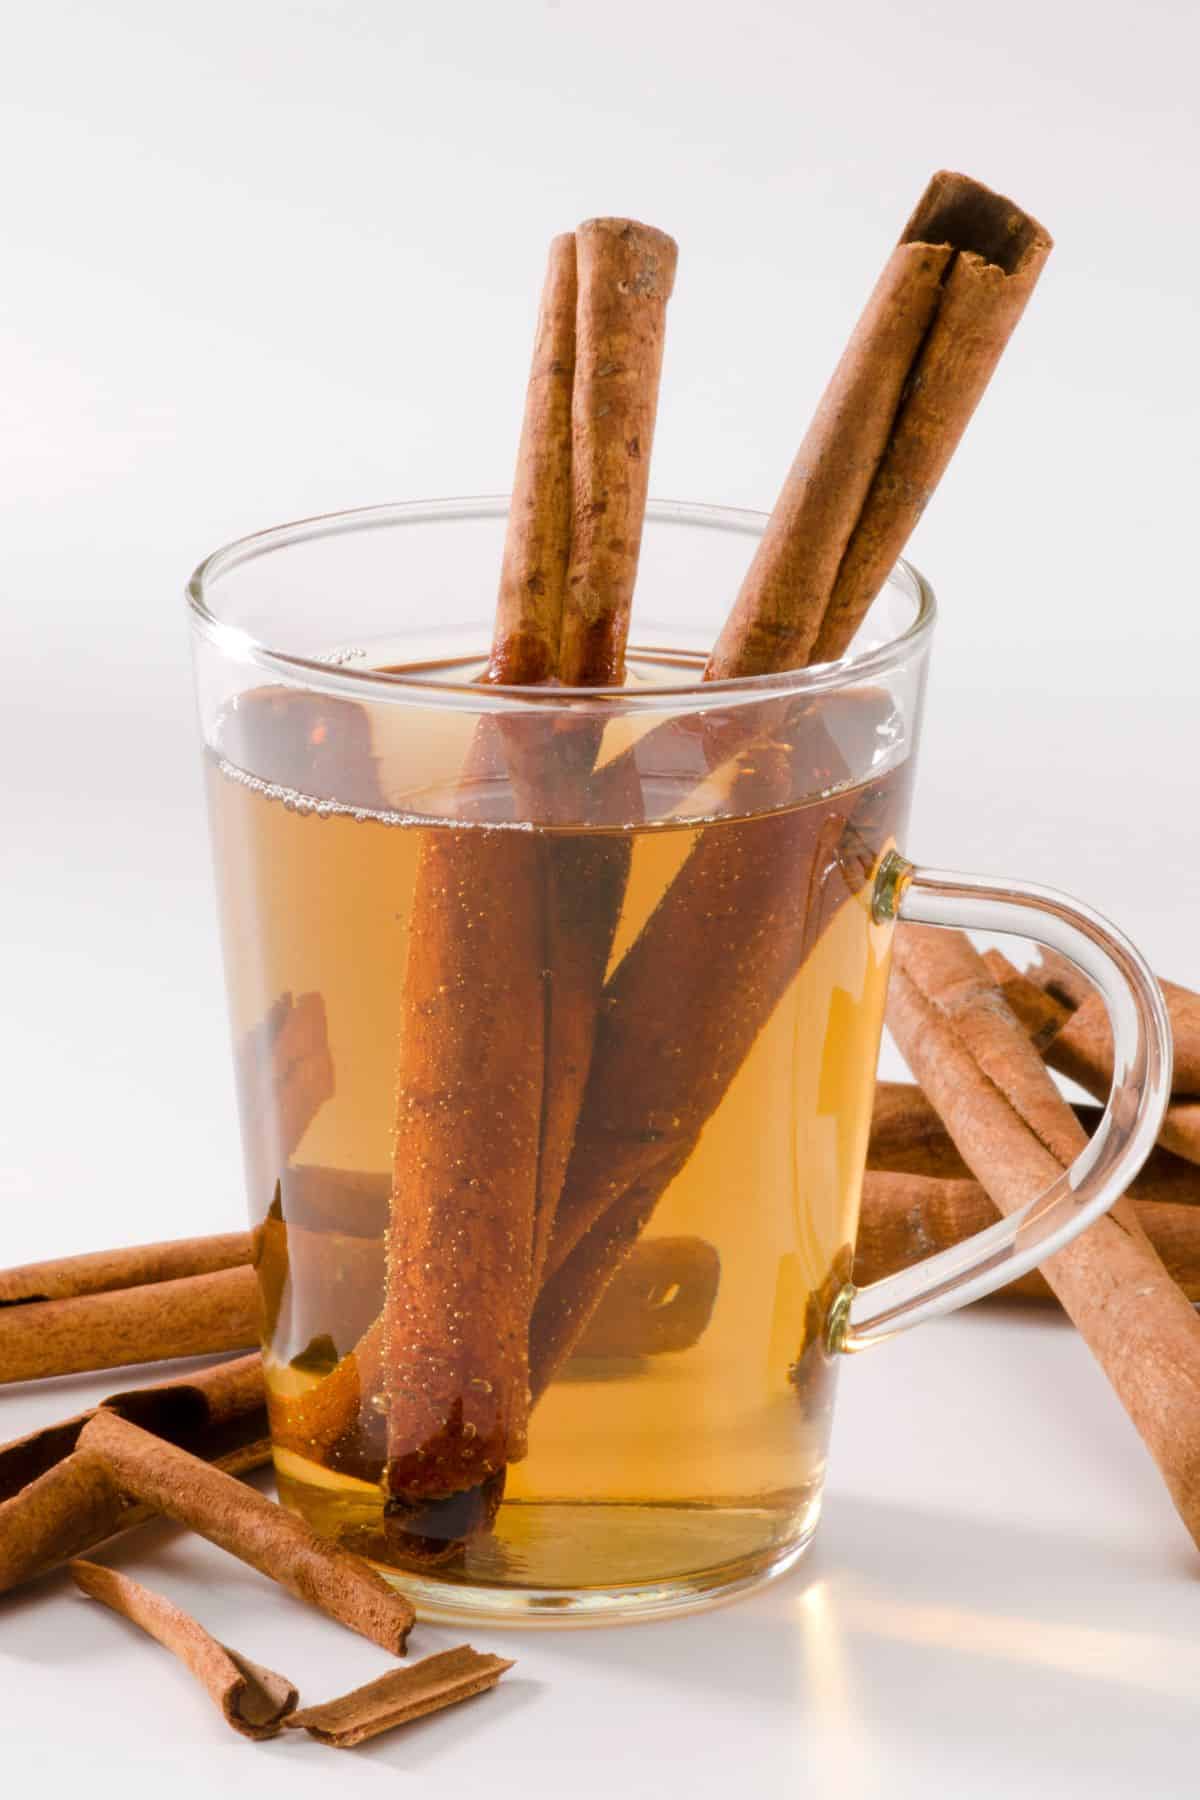 cinnamon tea in a cup with two cinnamon sticks.